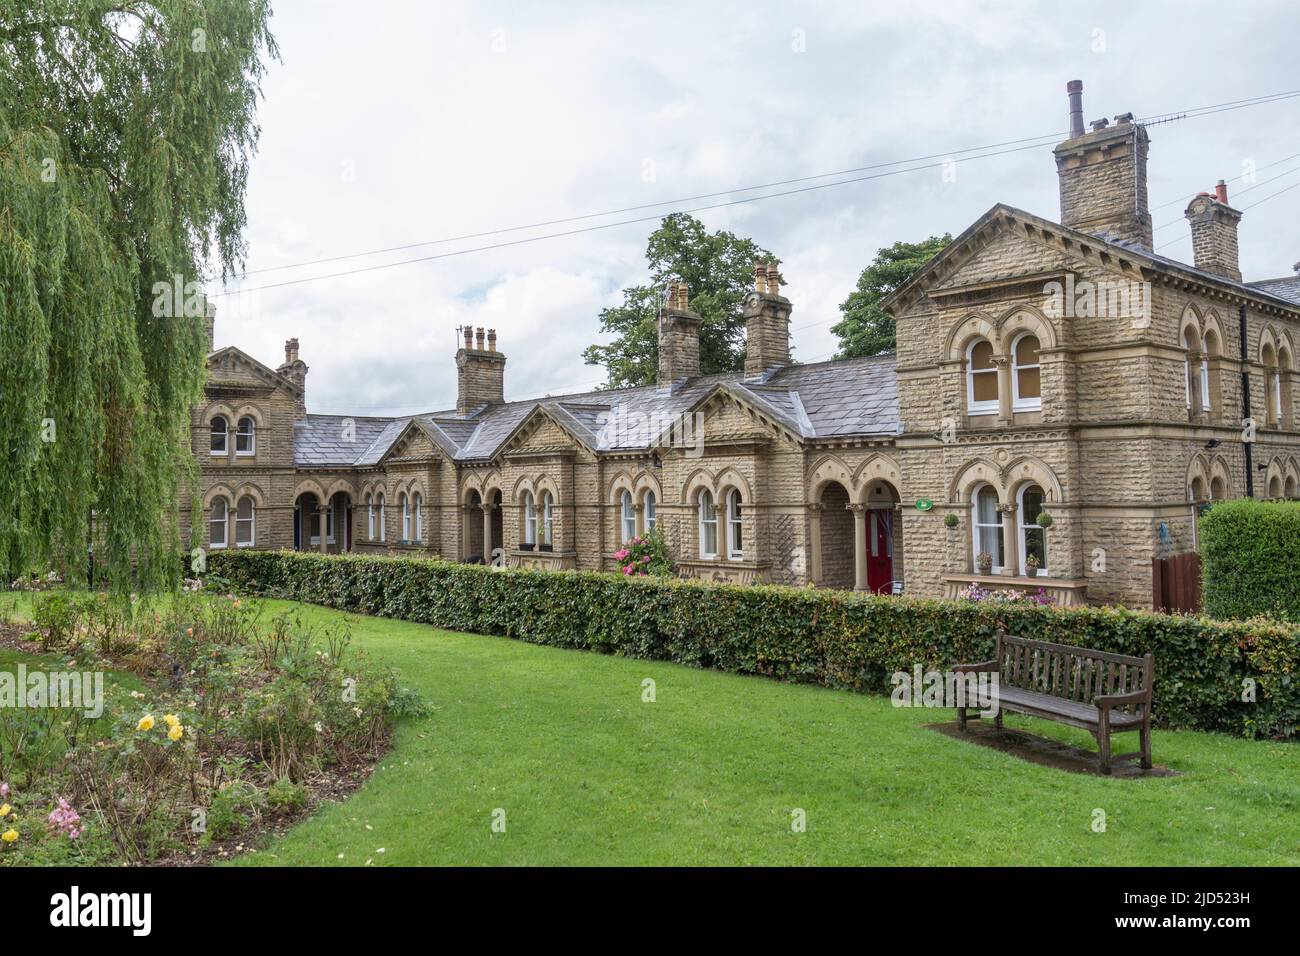 Stunning architecture of cottages in Saltaire, a Victorian model village, Shipley, Bradford, West Yorkshire, England. Stock Photo